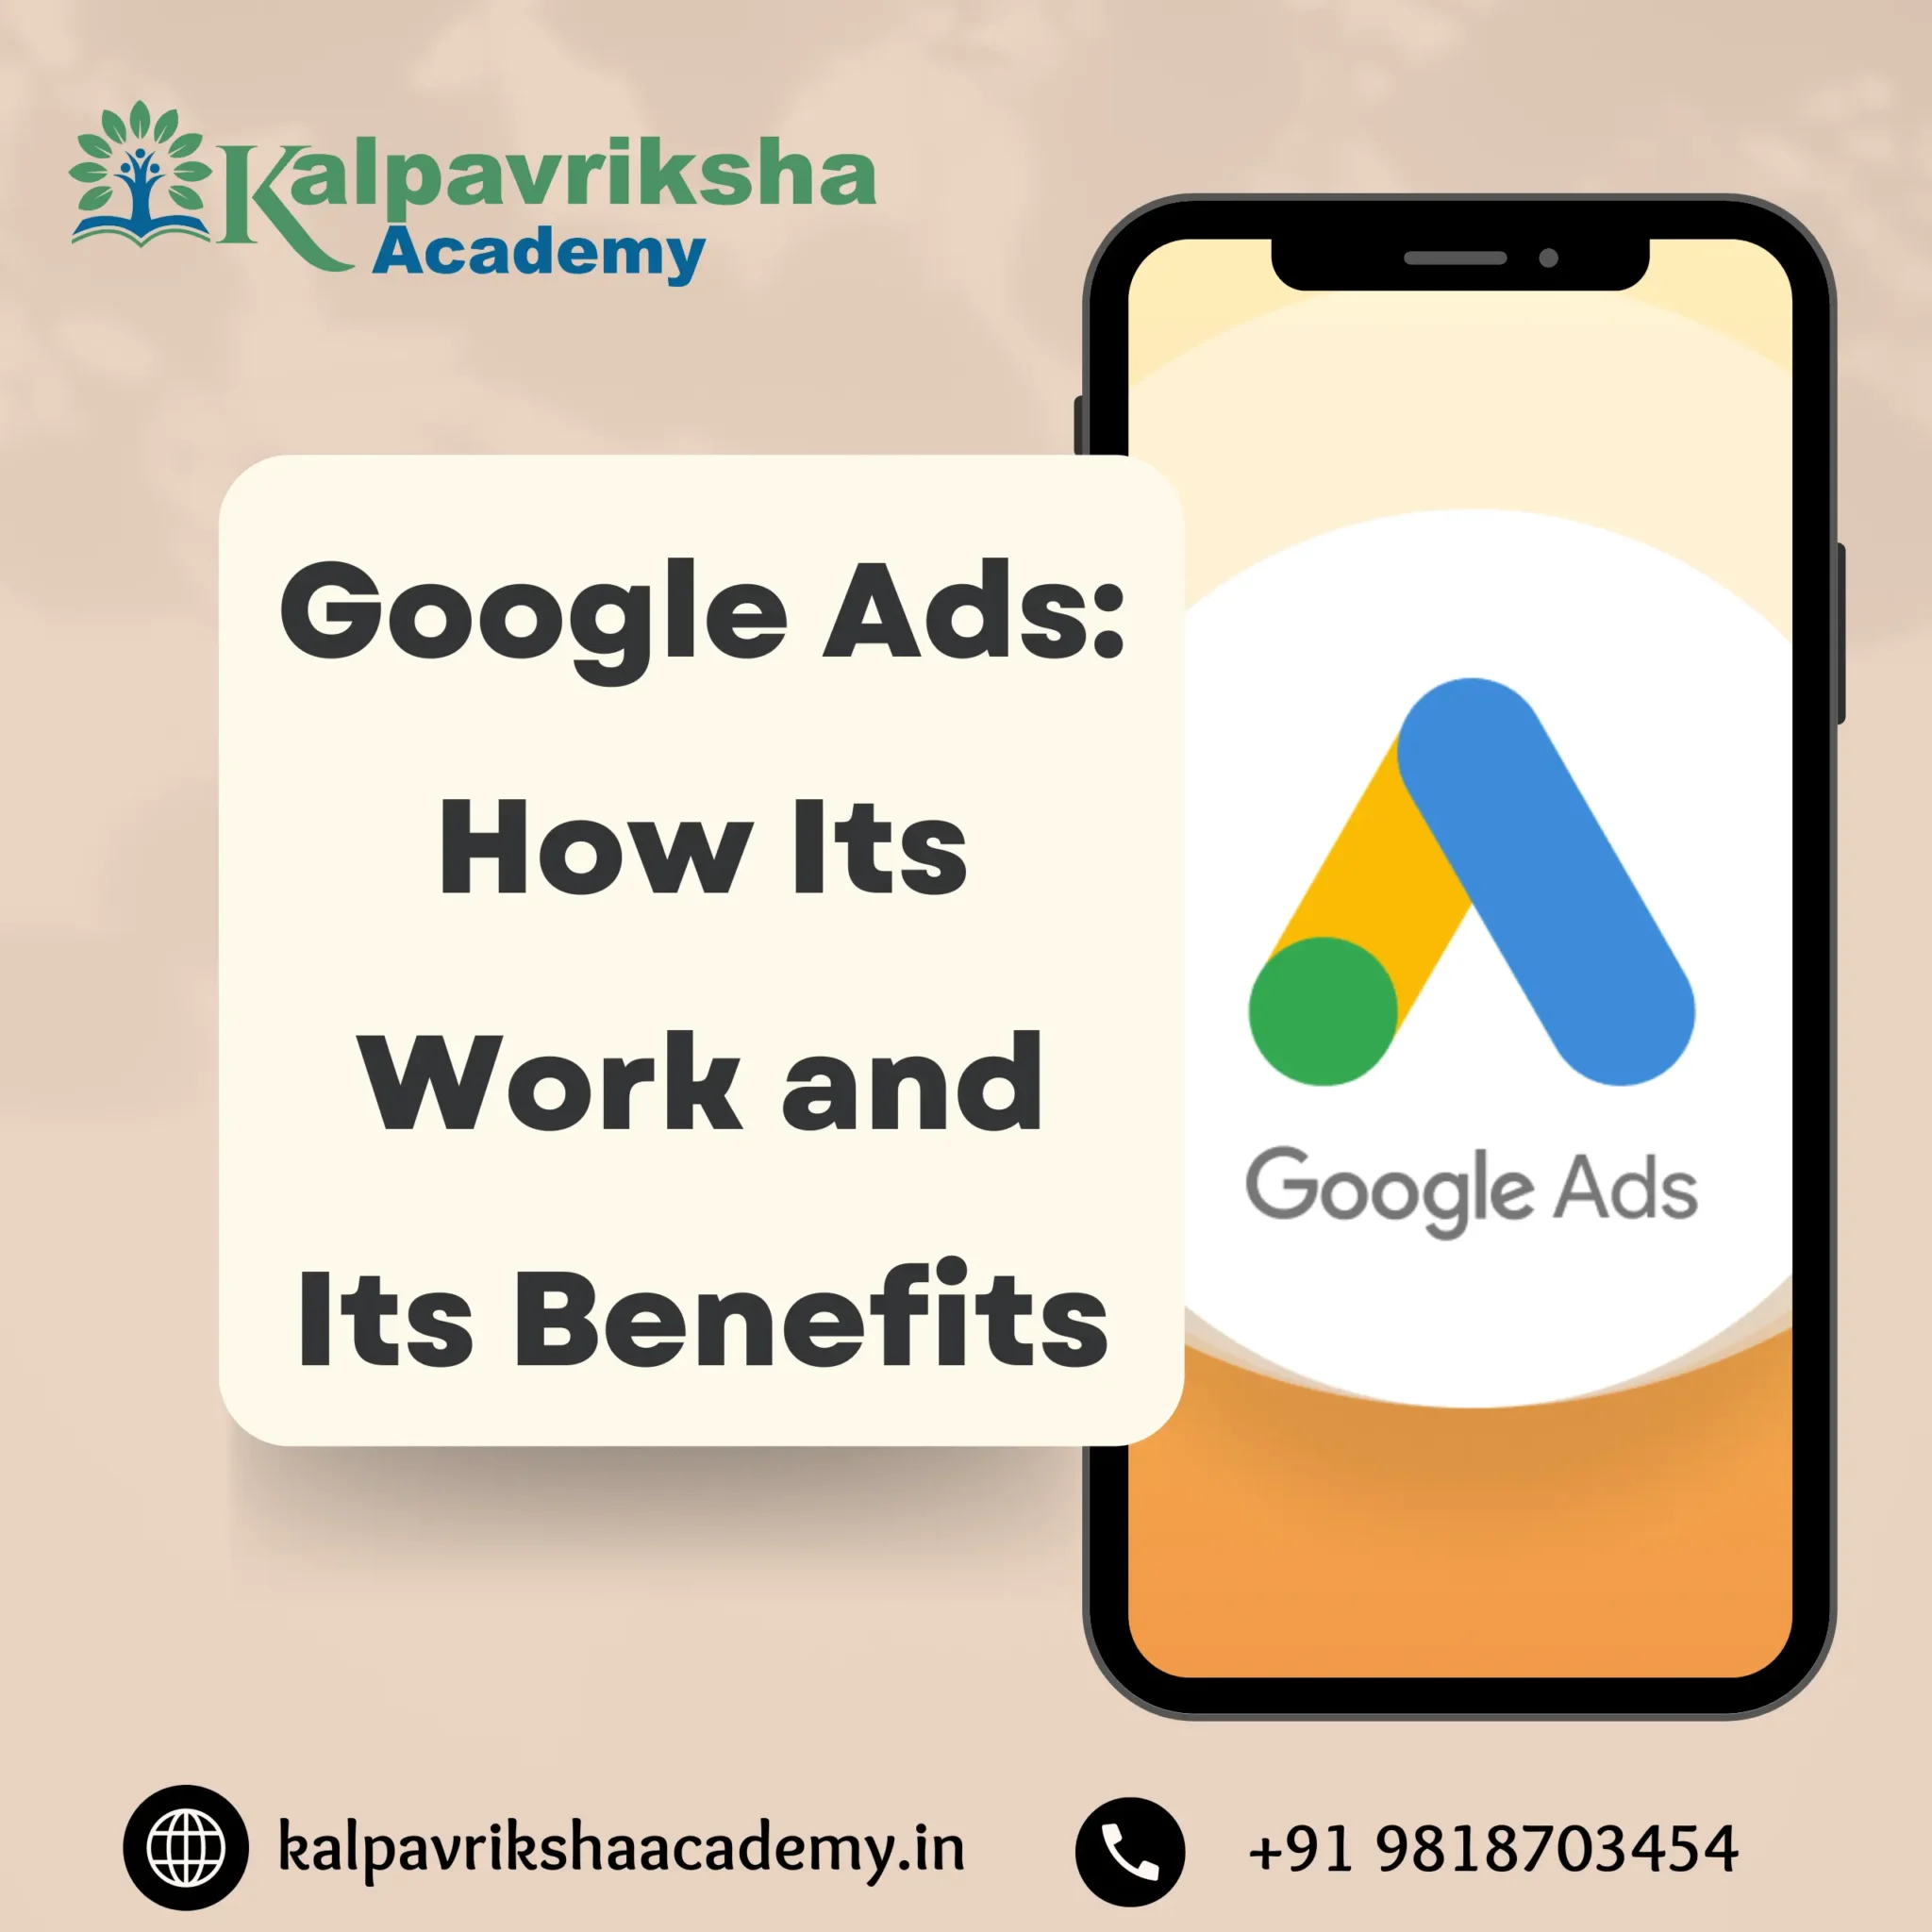 Google Ads: How Its Work and Its Benefits